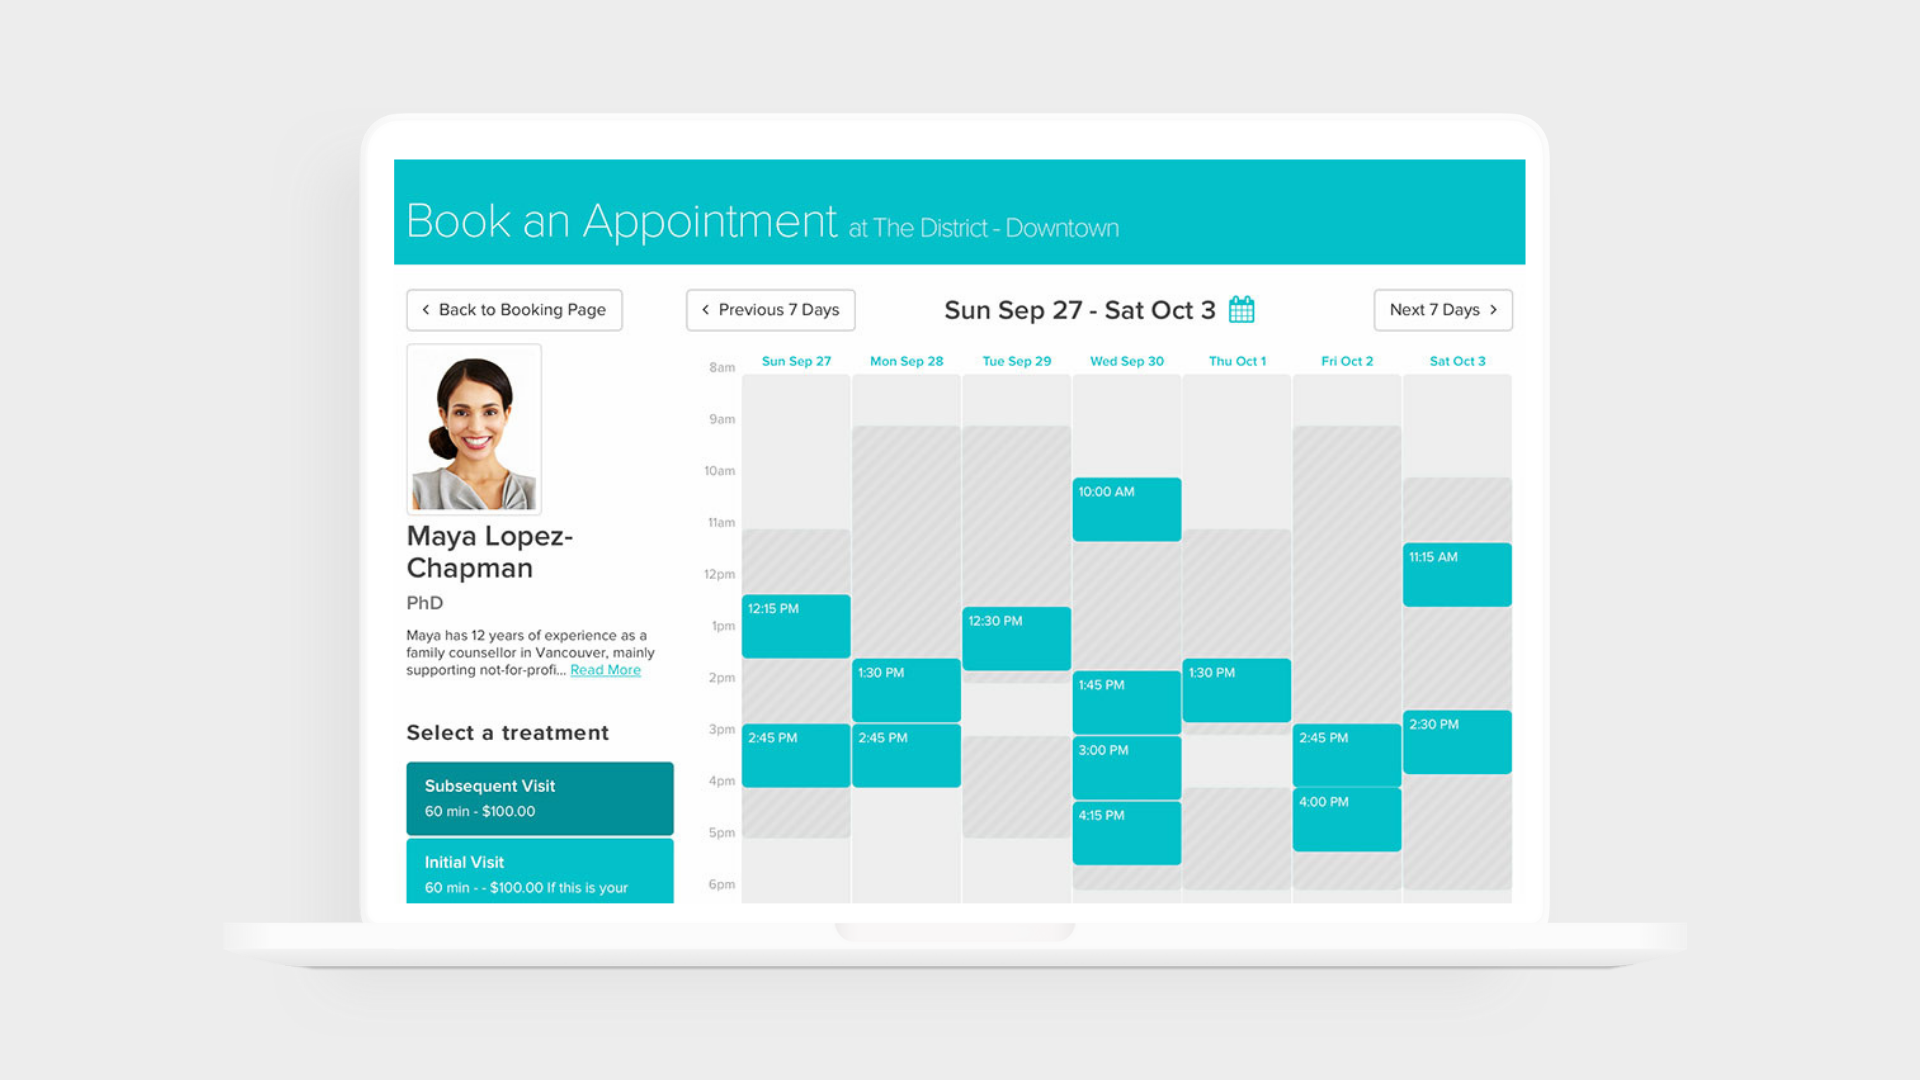 Jane Book an Appointment